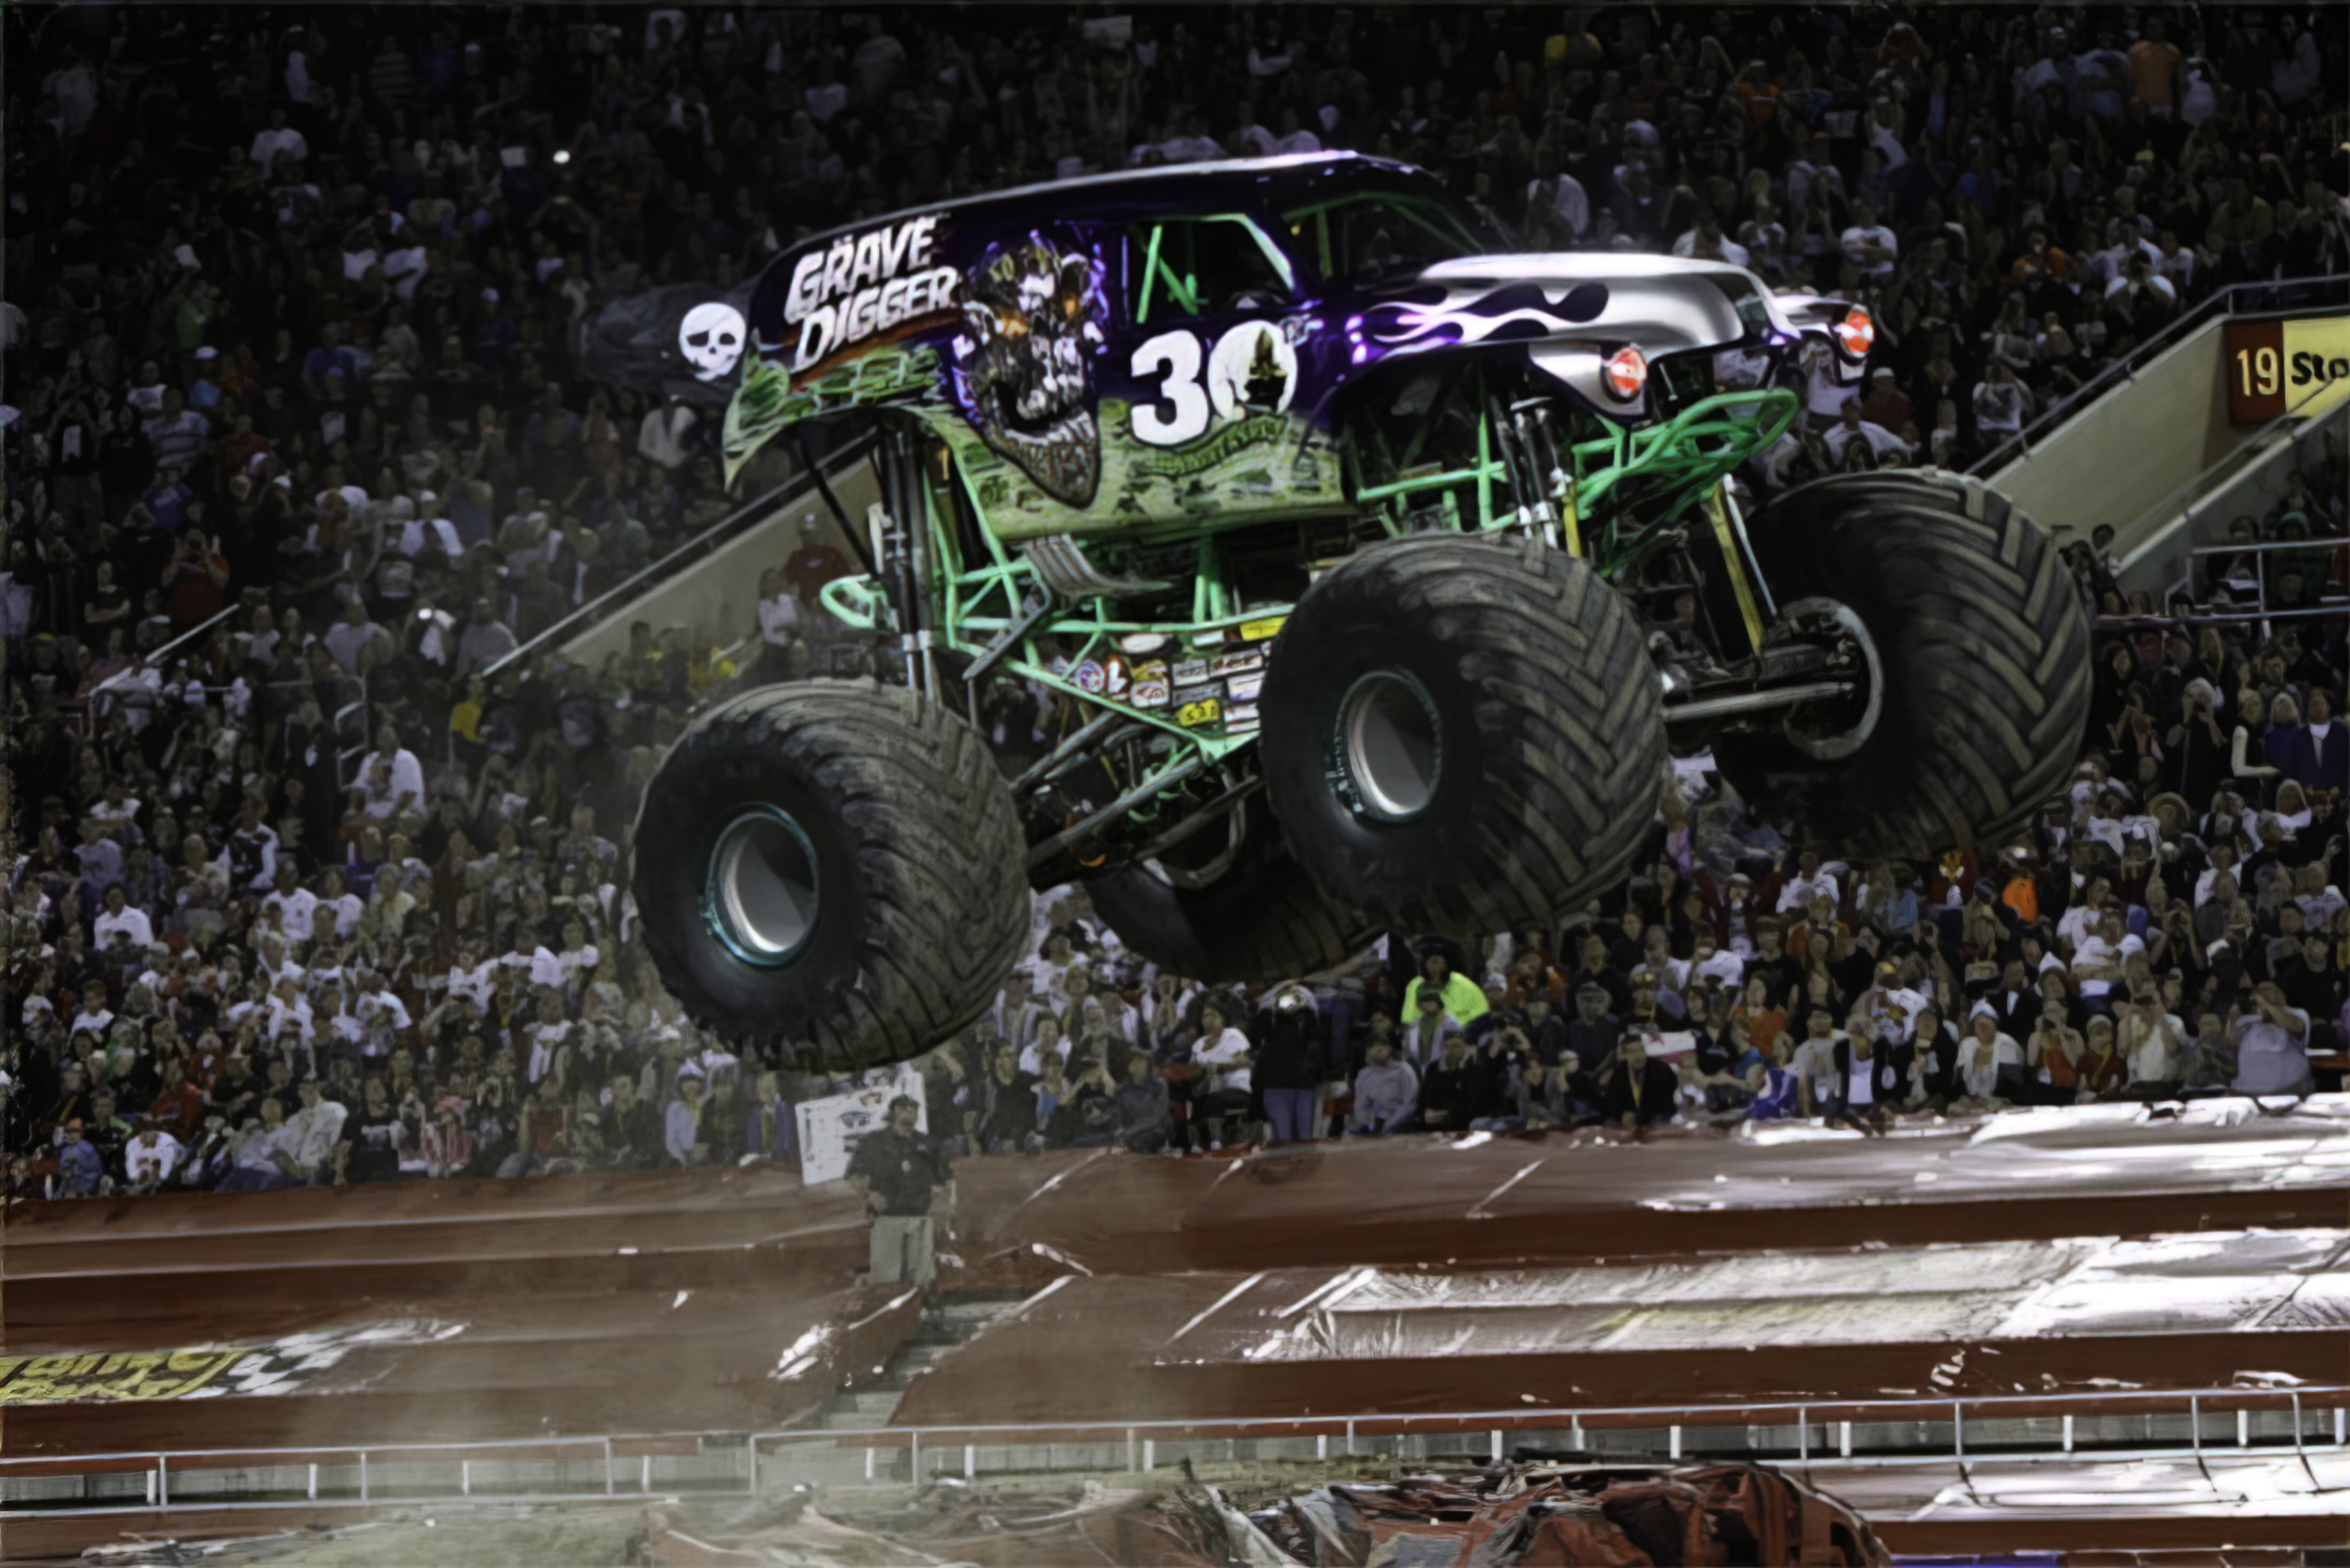 13 awesome monster truck records: Historic firsts to epic stunts